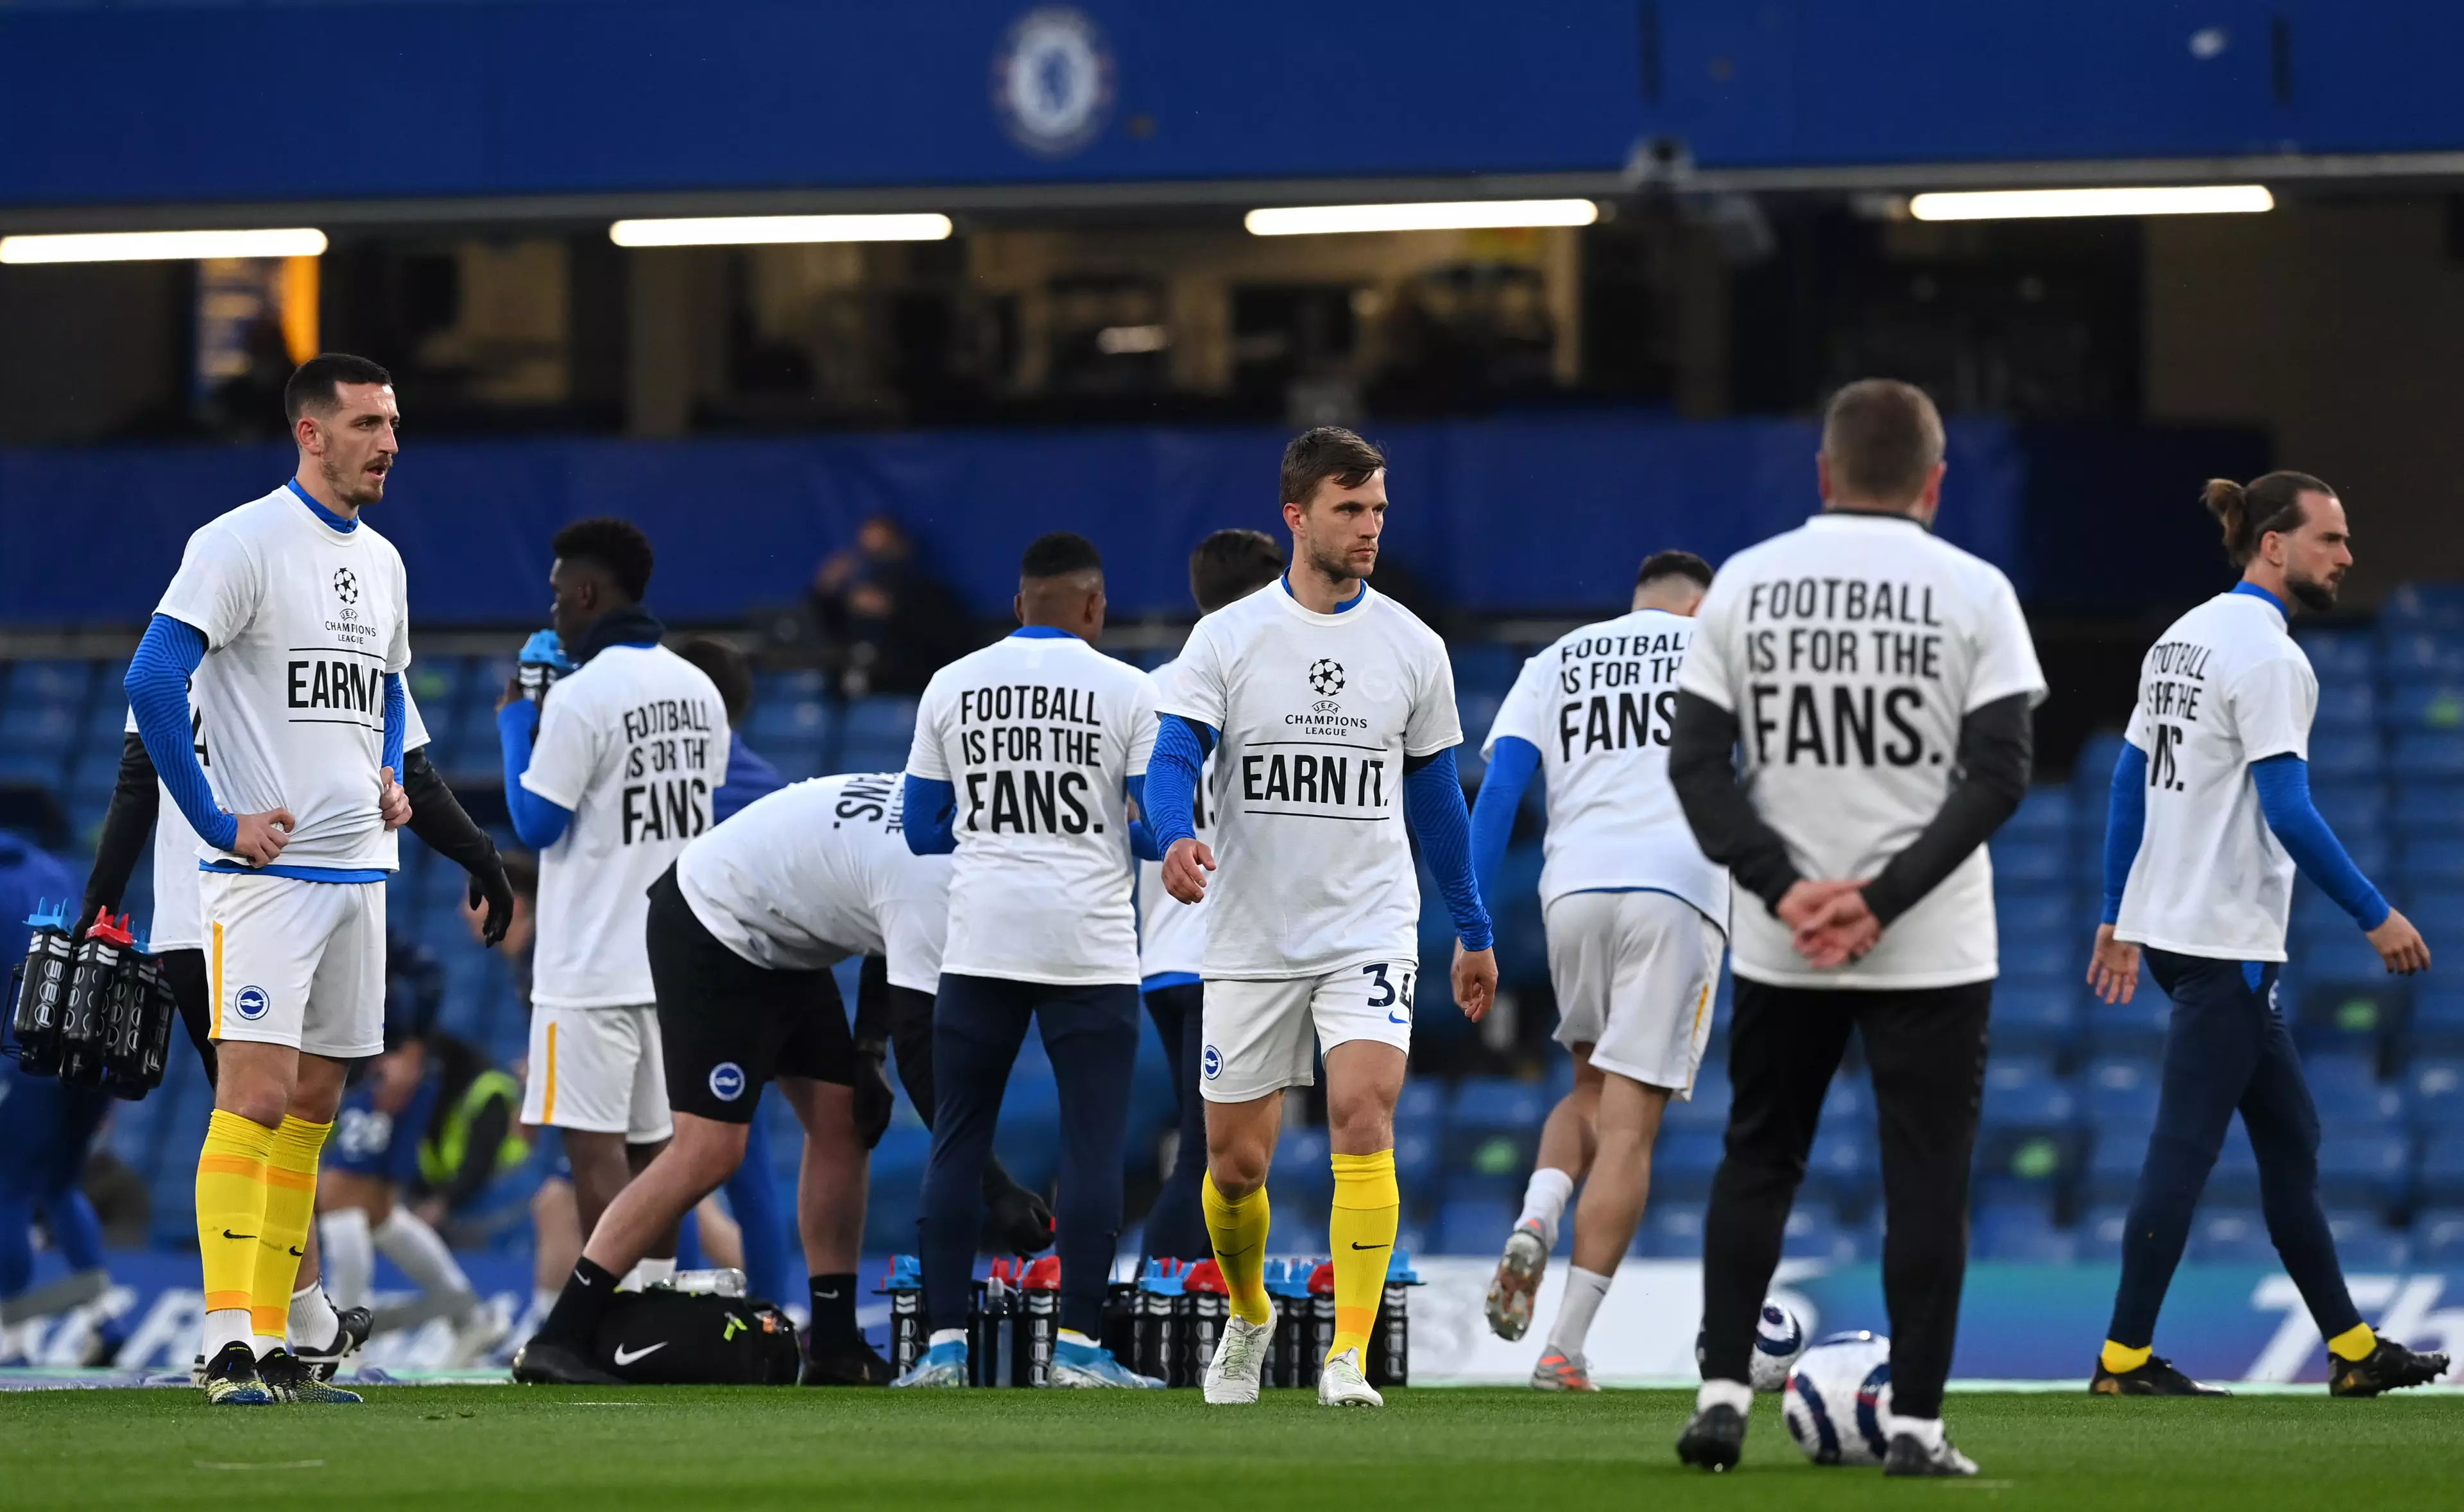 Brighton players also wore the t-shirts before playing Chelsea. Image: PA Images